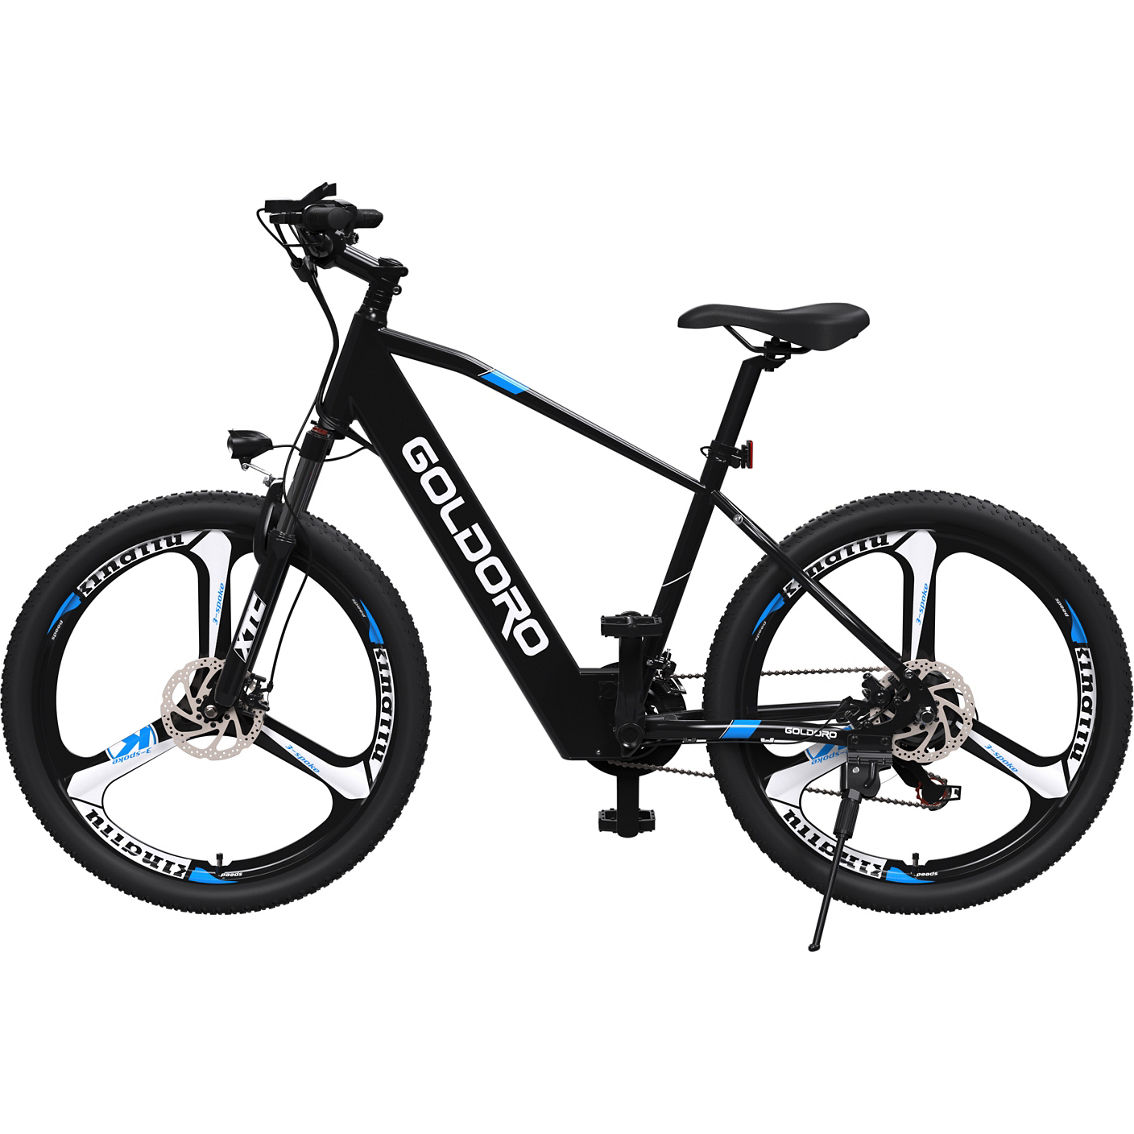 Goldoro Bikes X7 350W 26 in. Electric Mountain Bike with Alloy Wheels - Image 2 of 10